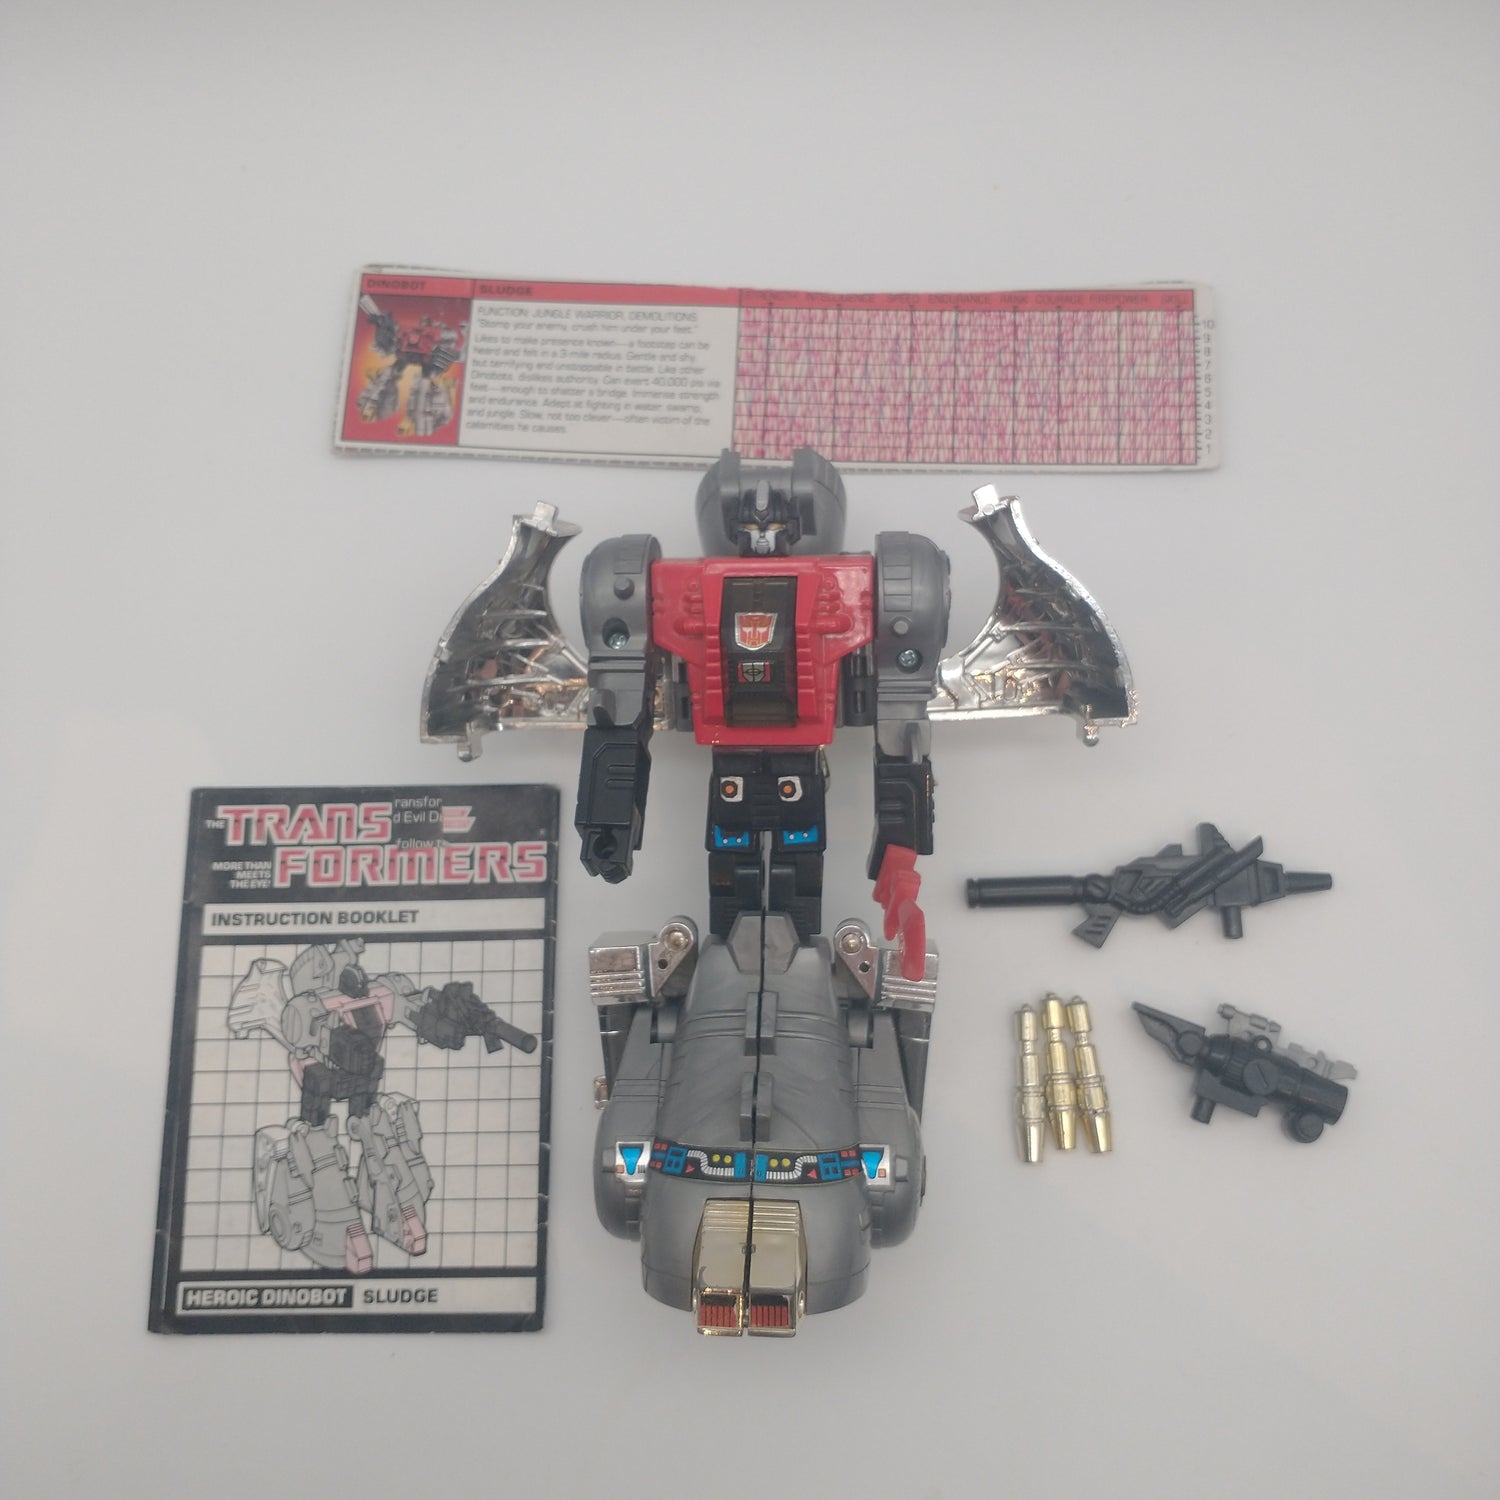 The figure among the manual, tech spe card, and accessories